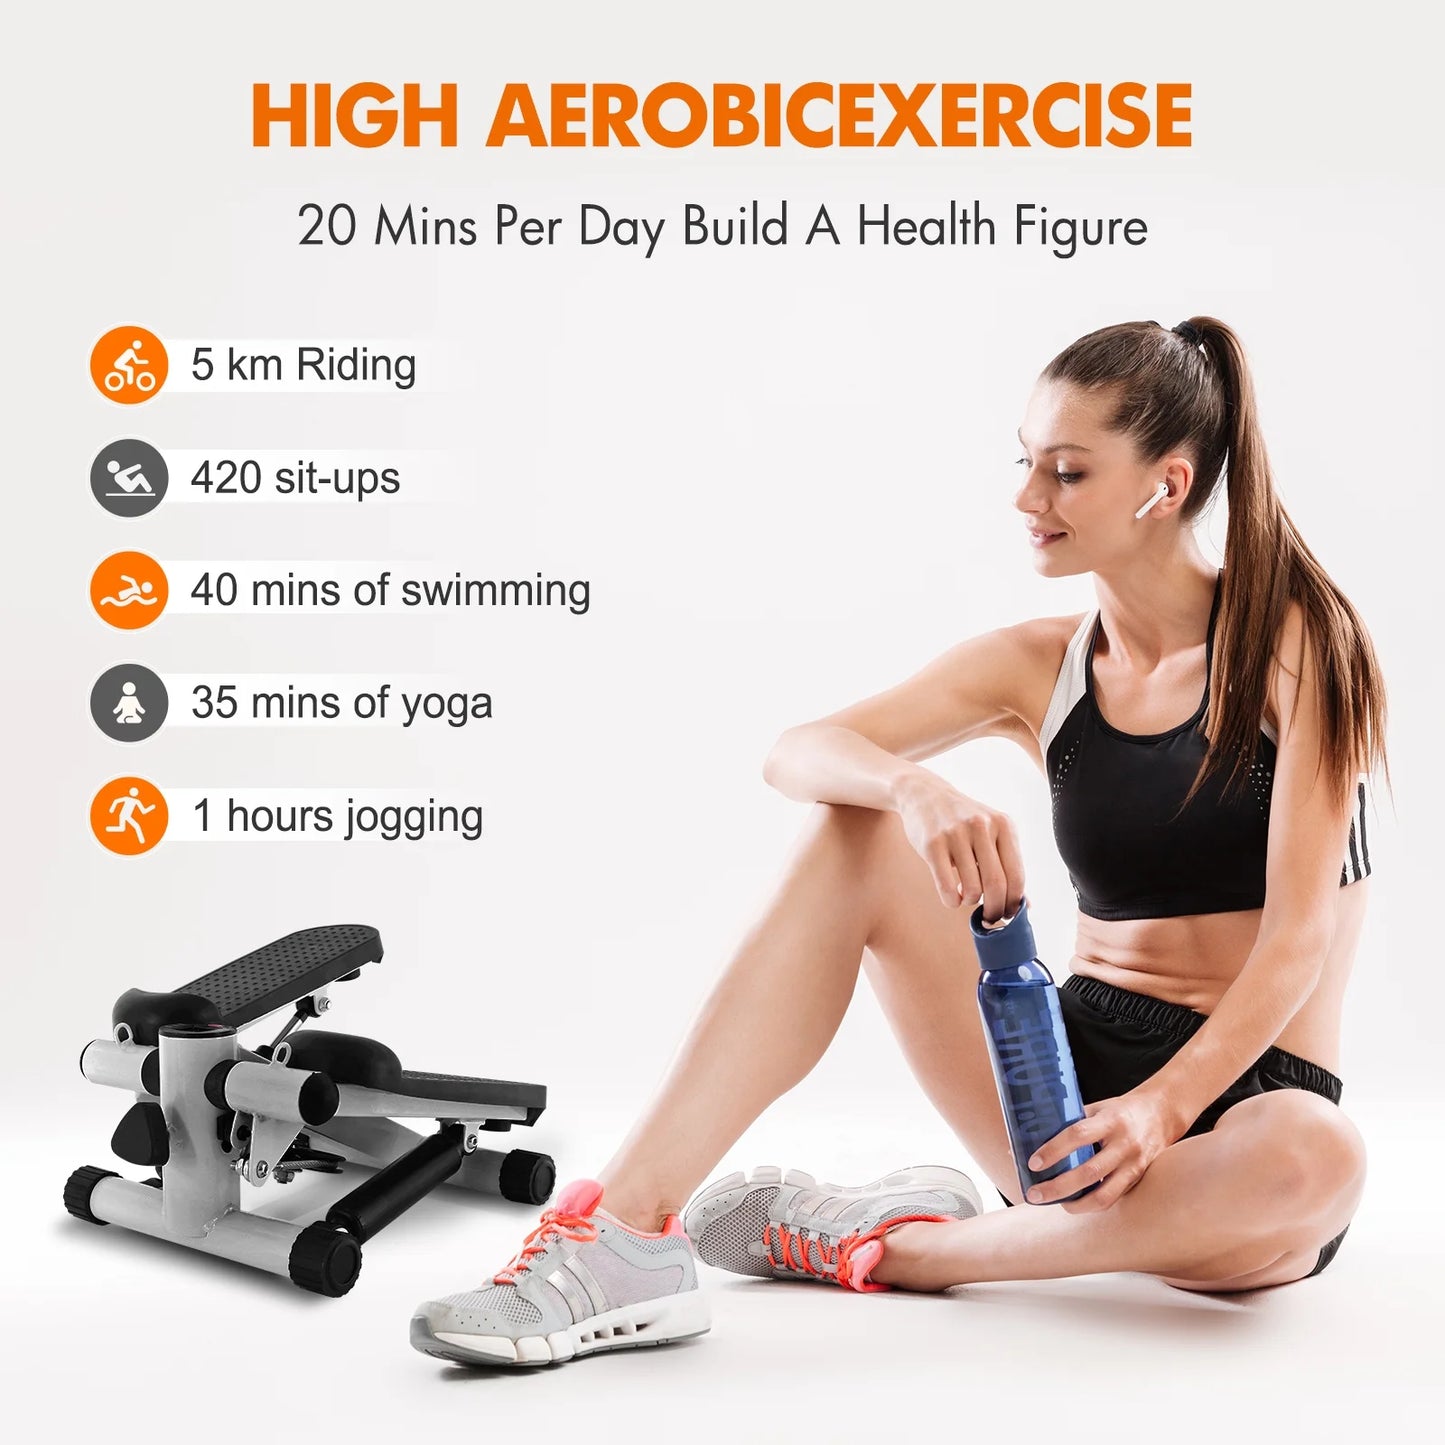 Steppers for Exercise,Stair Stepper with Resistance Bands,Mini Aerobic Stepper Exercise Machine,Stair Climber Equipment with LCD Monitor,White